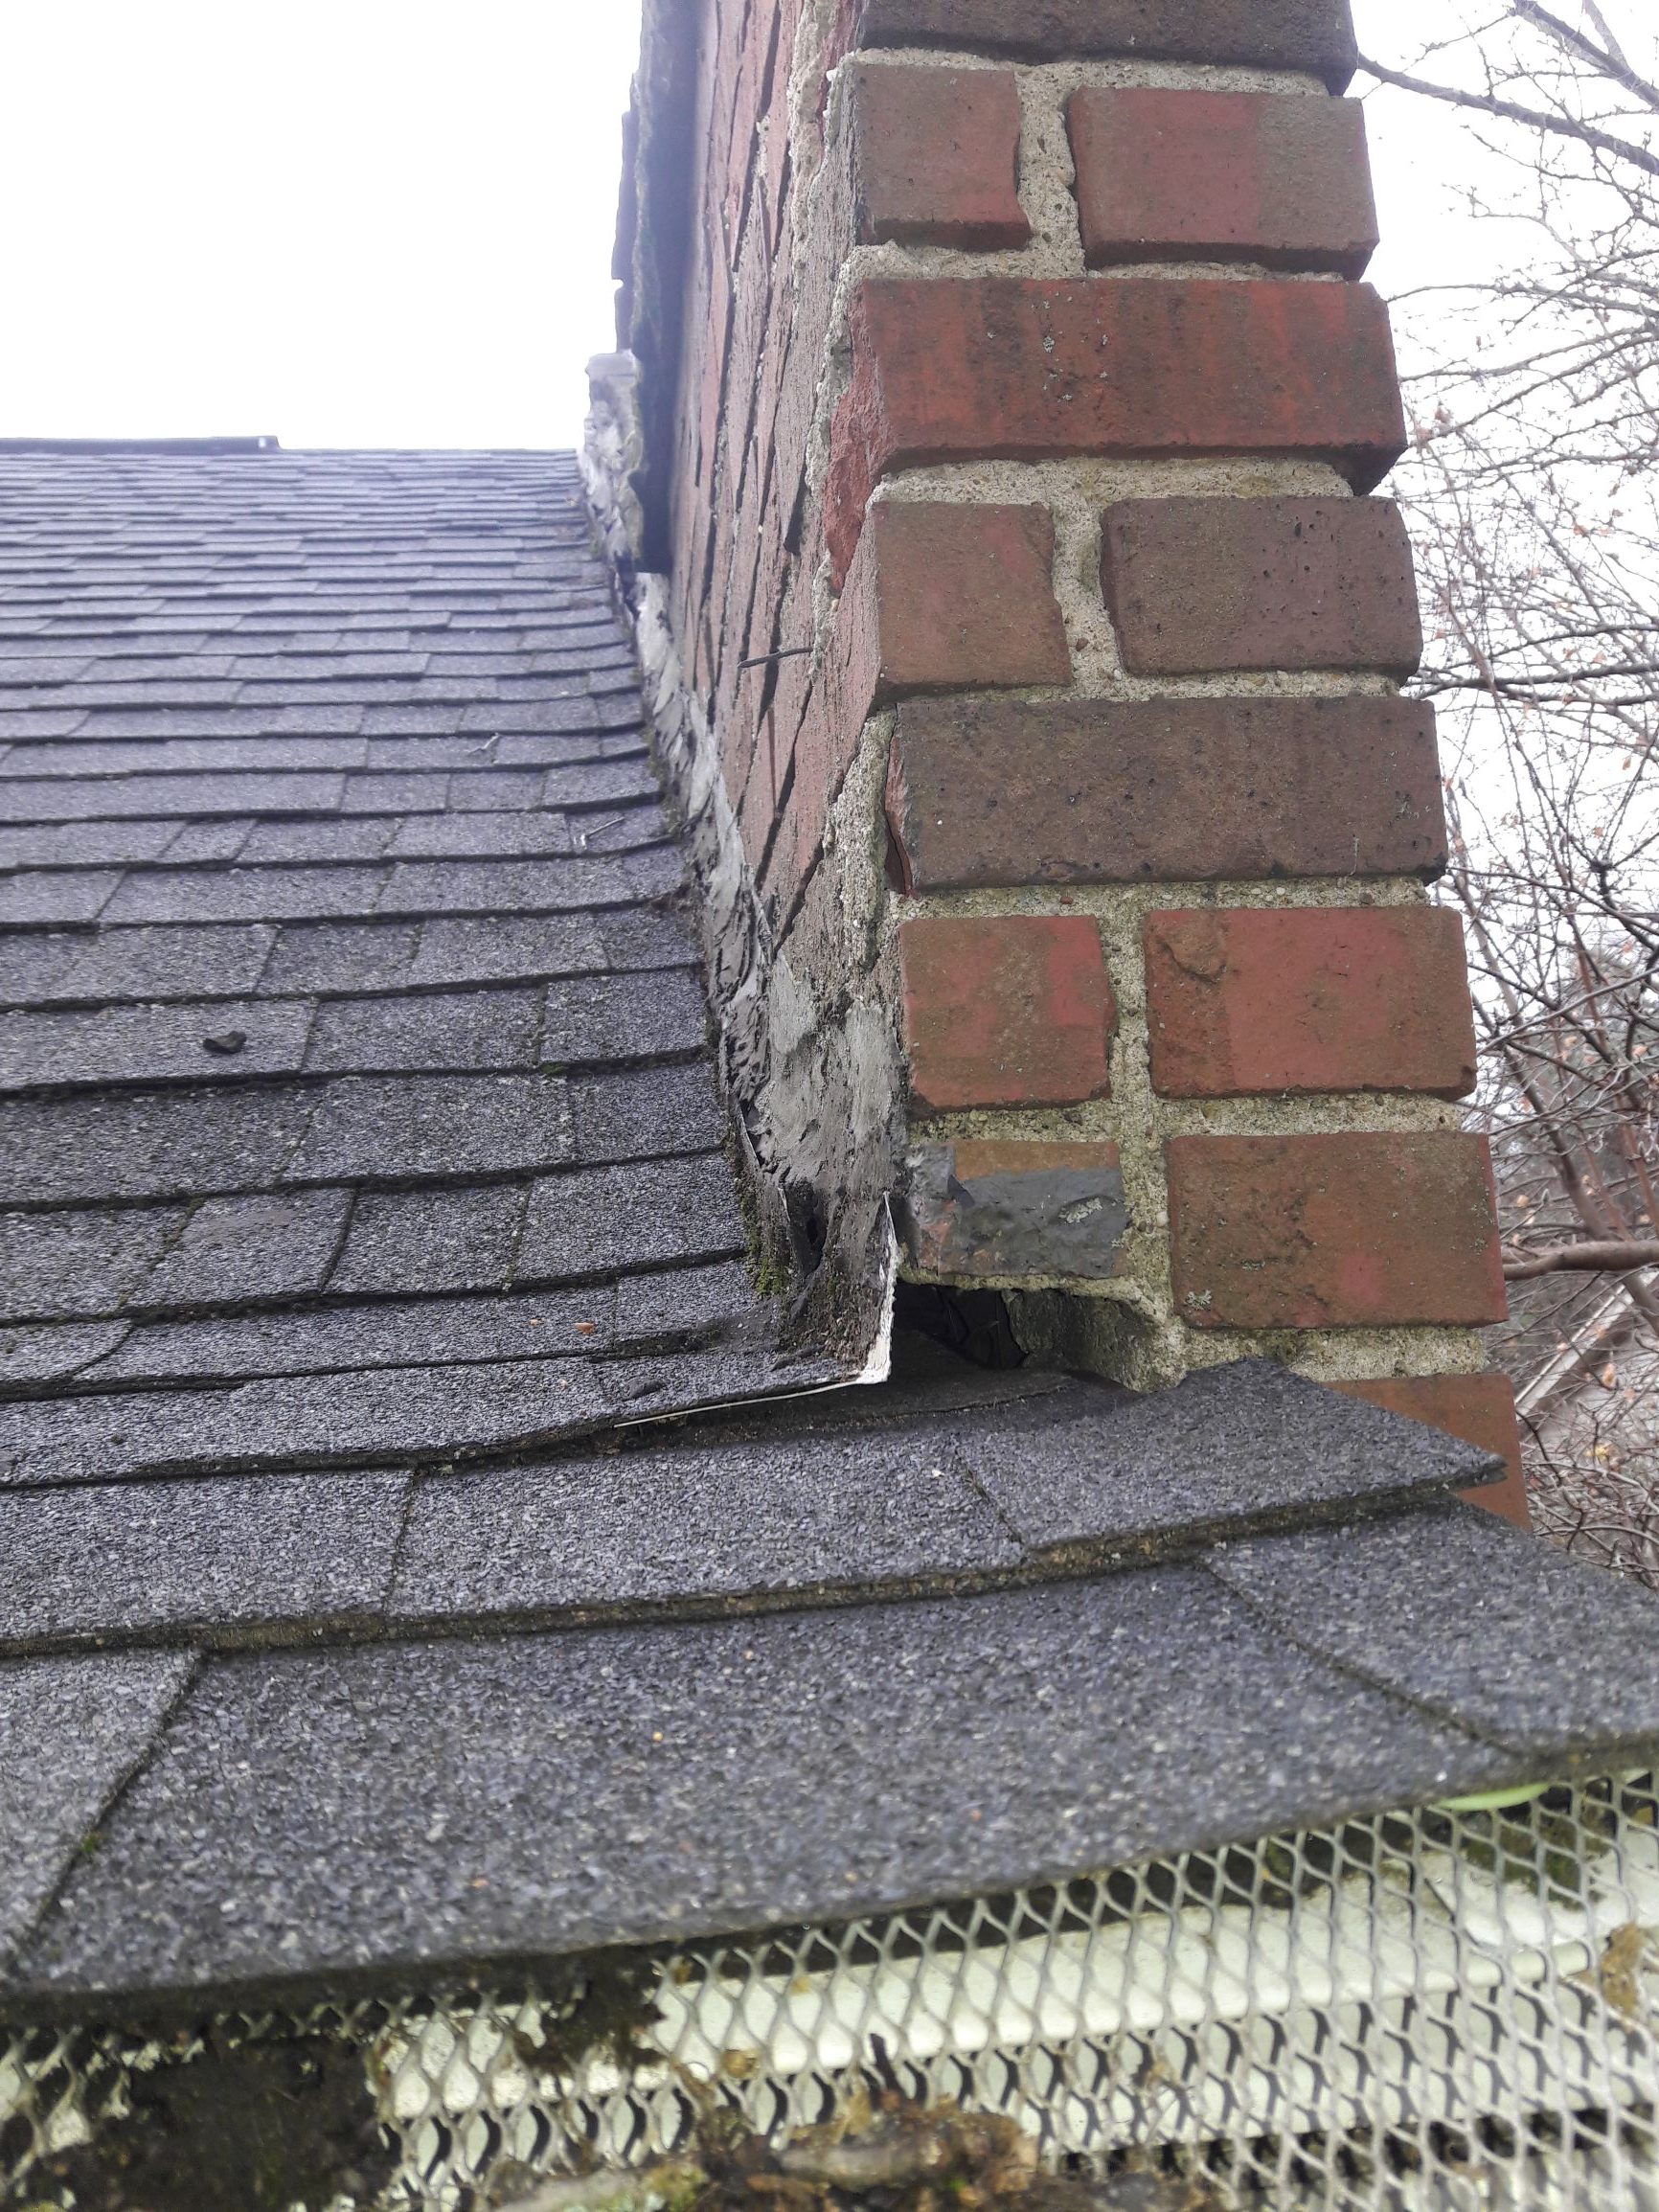 Ace Home Inspection, Inc » Flying squirrel in attic trap